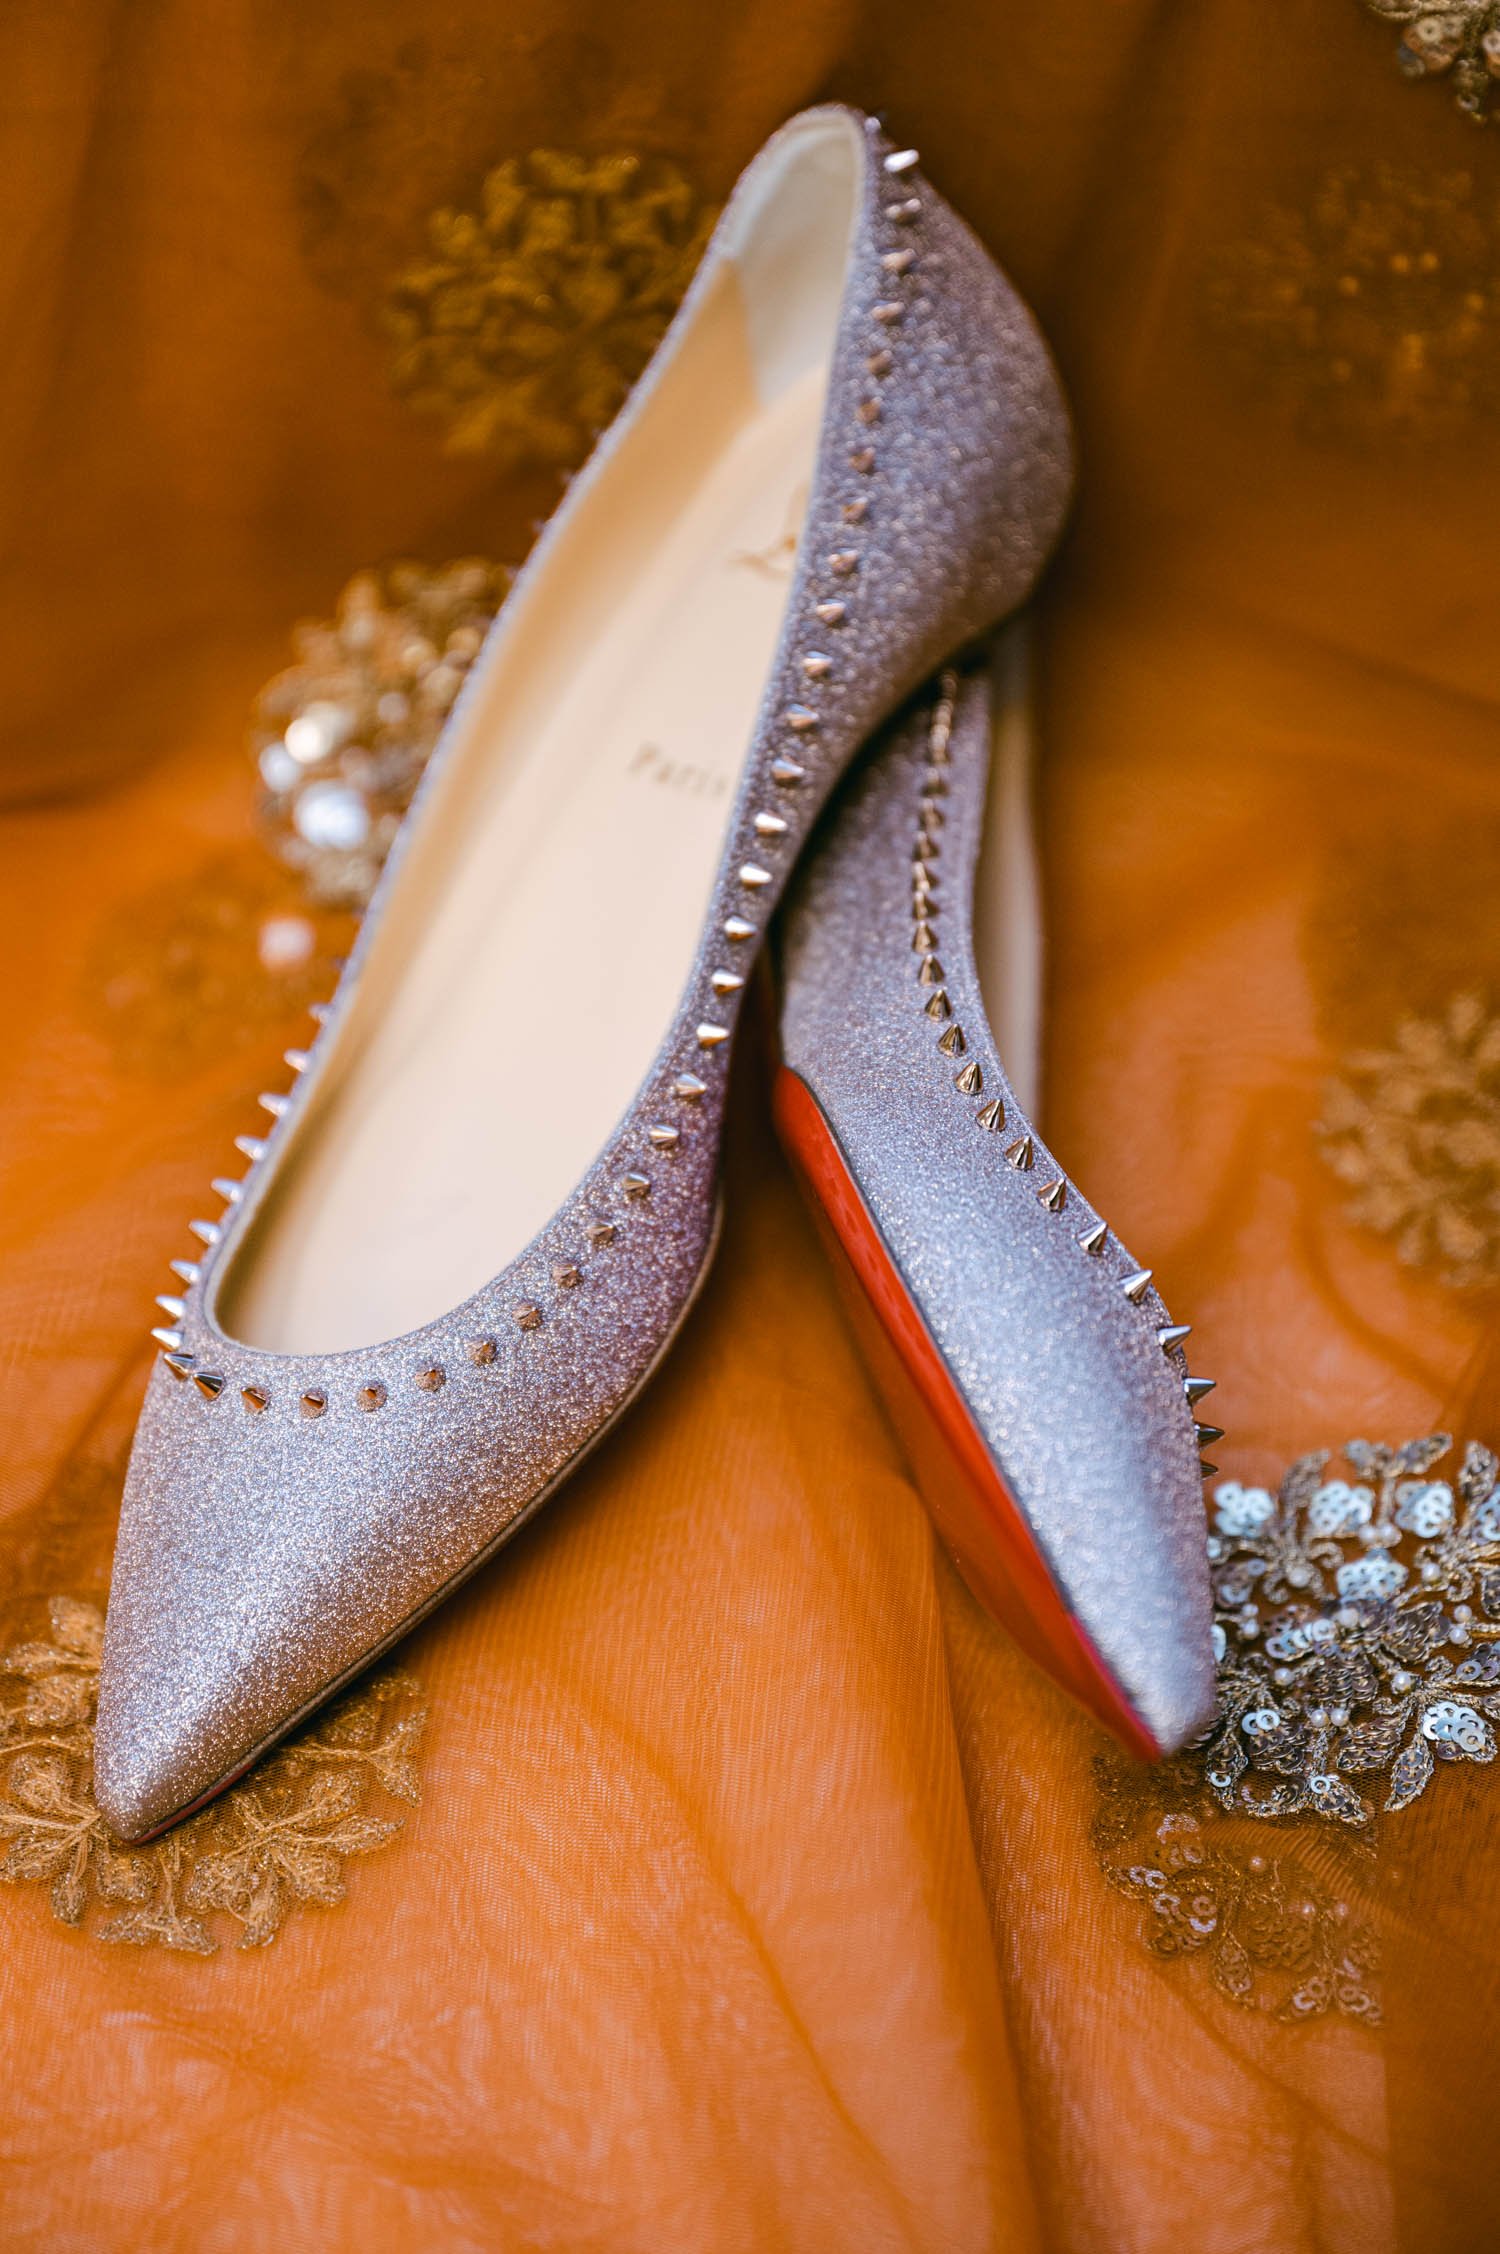 Hindu wedding ceremony at american canyon, photo of studded wedding shoes (louis vuitton flats) 